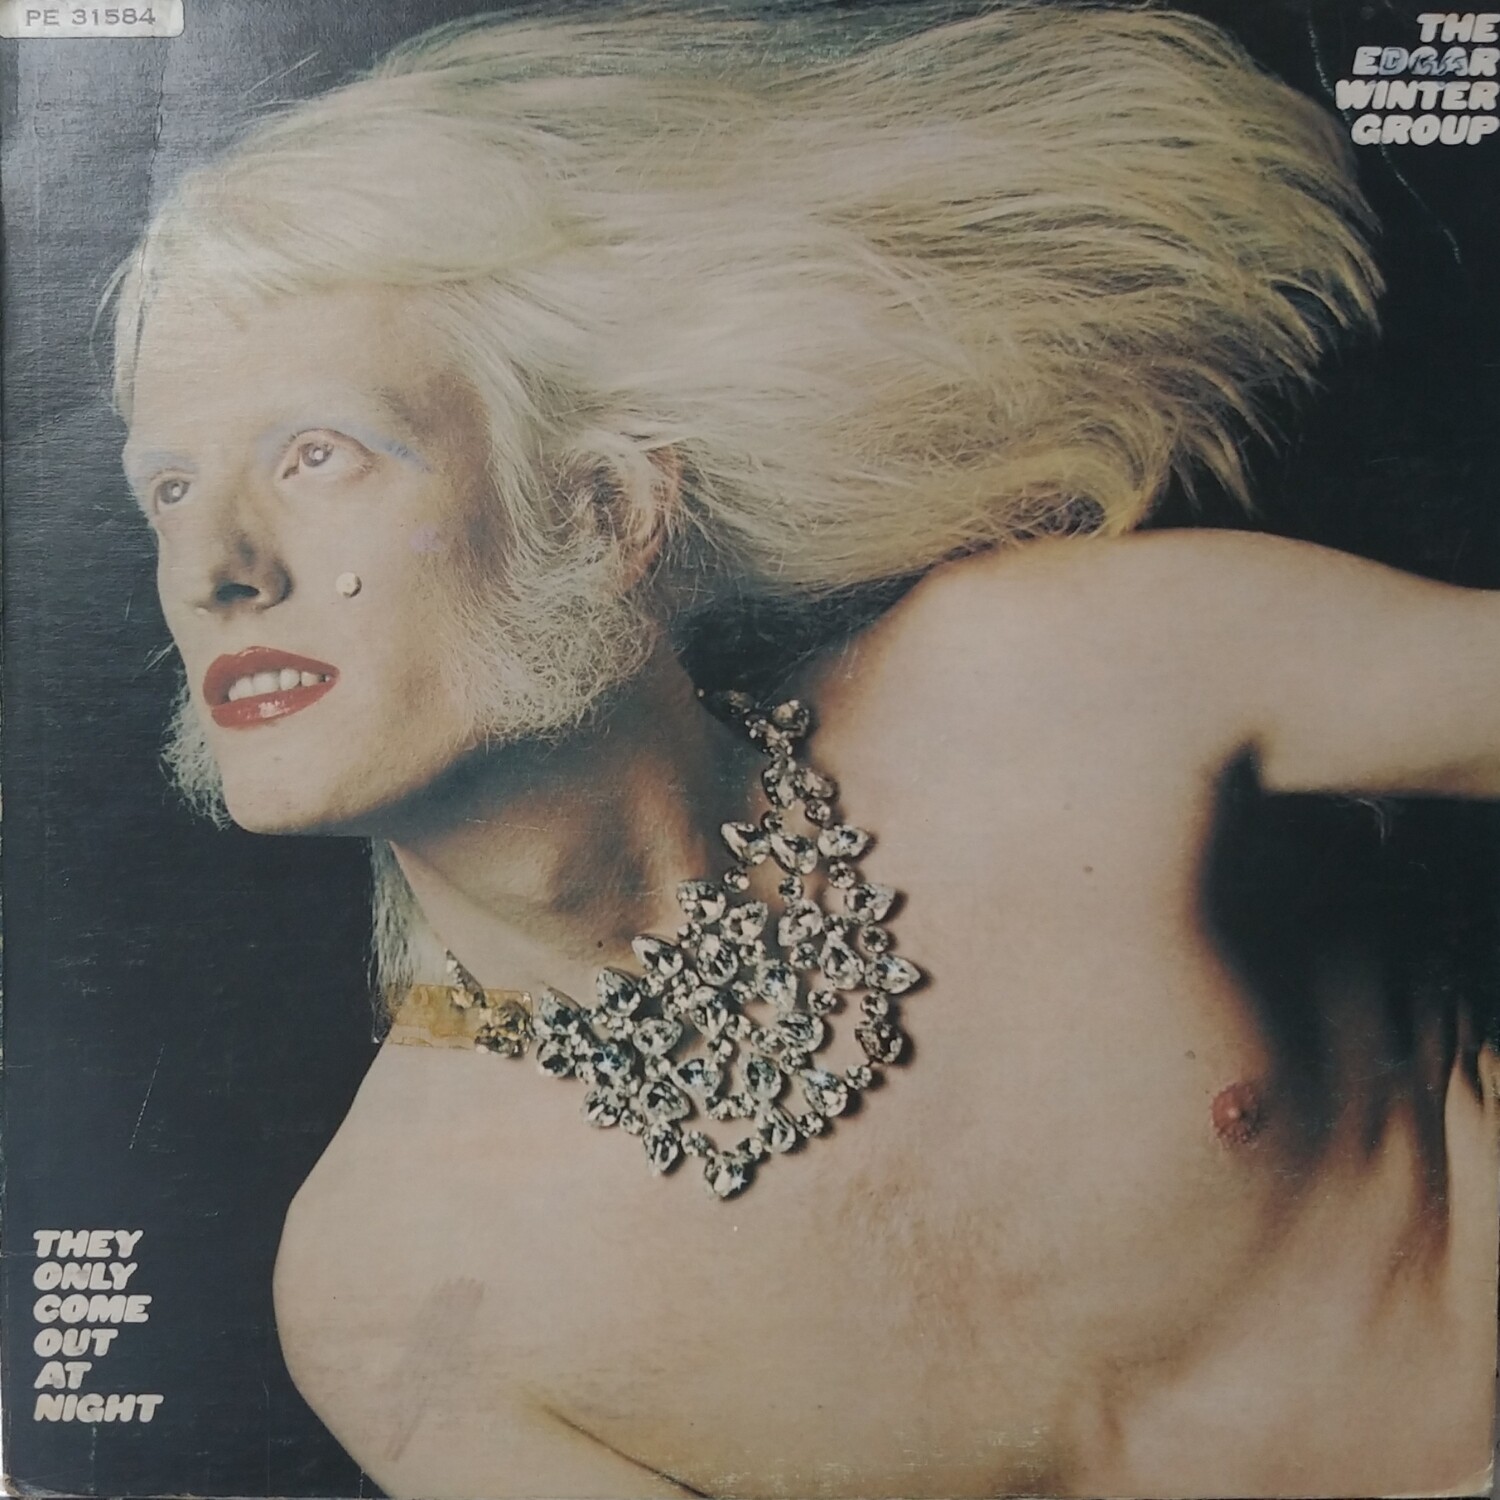 The Edgar Winter Group - They only Come Out at Night